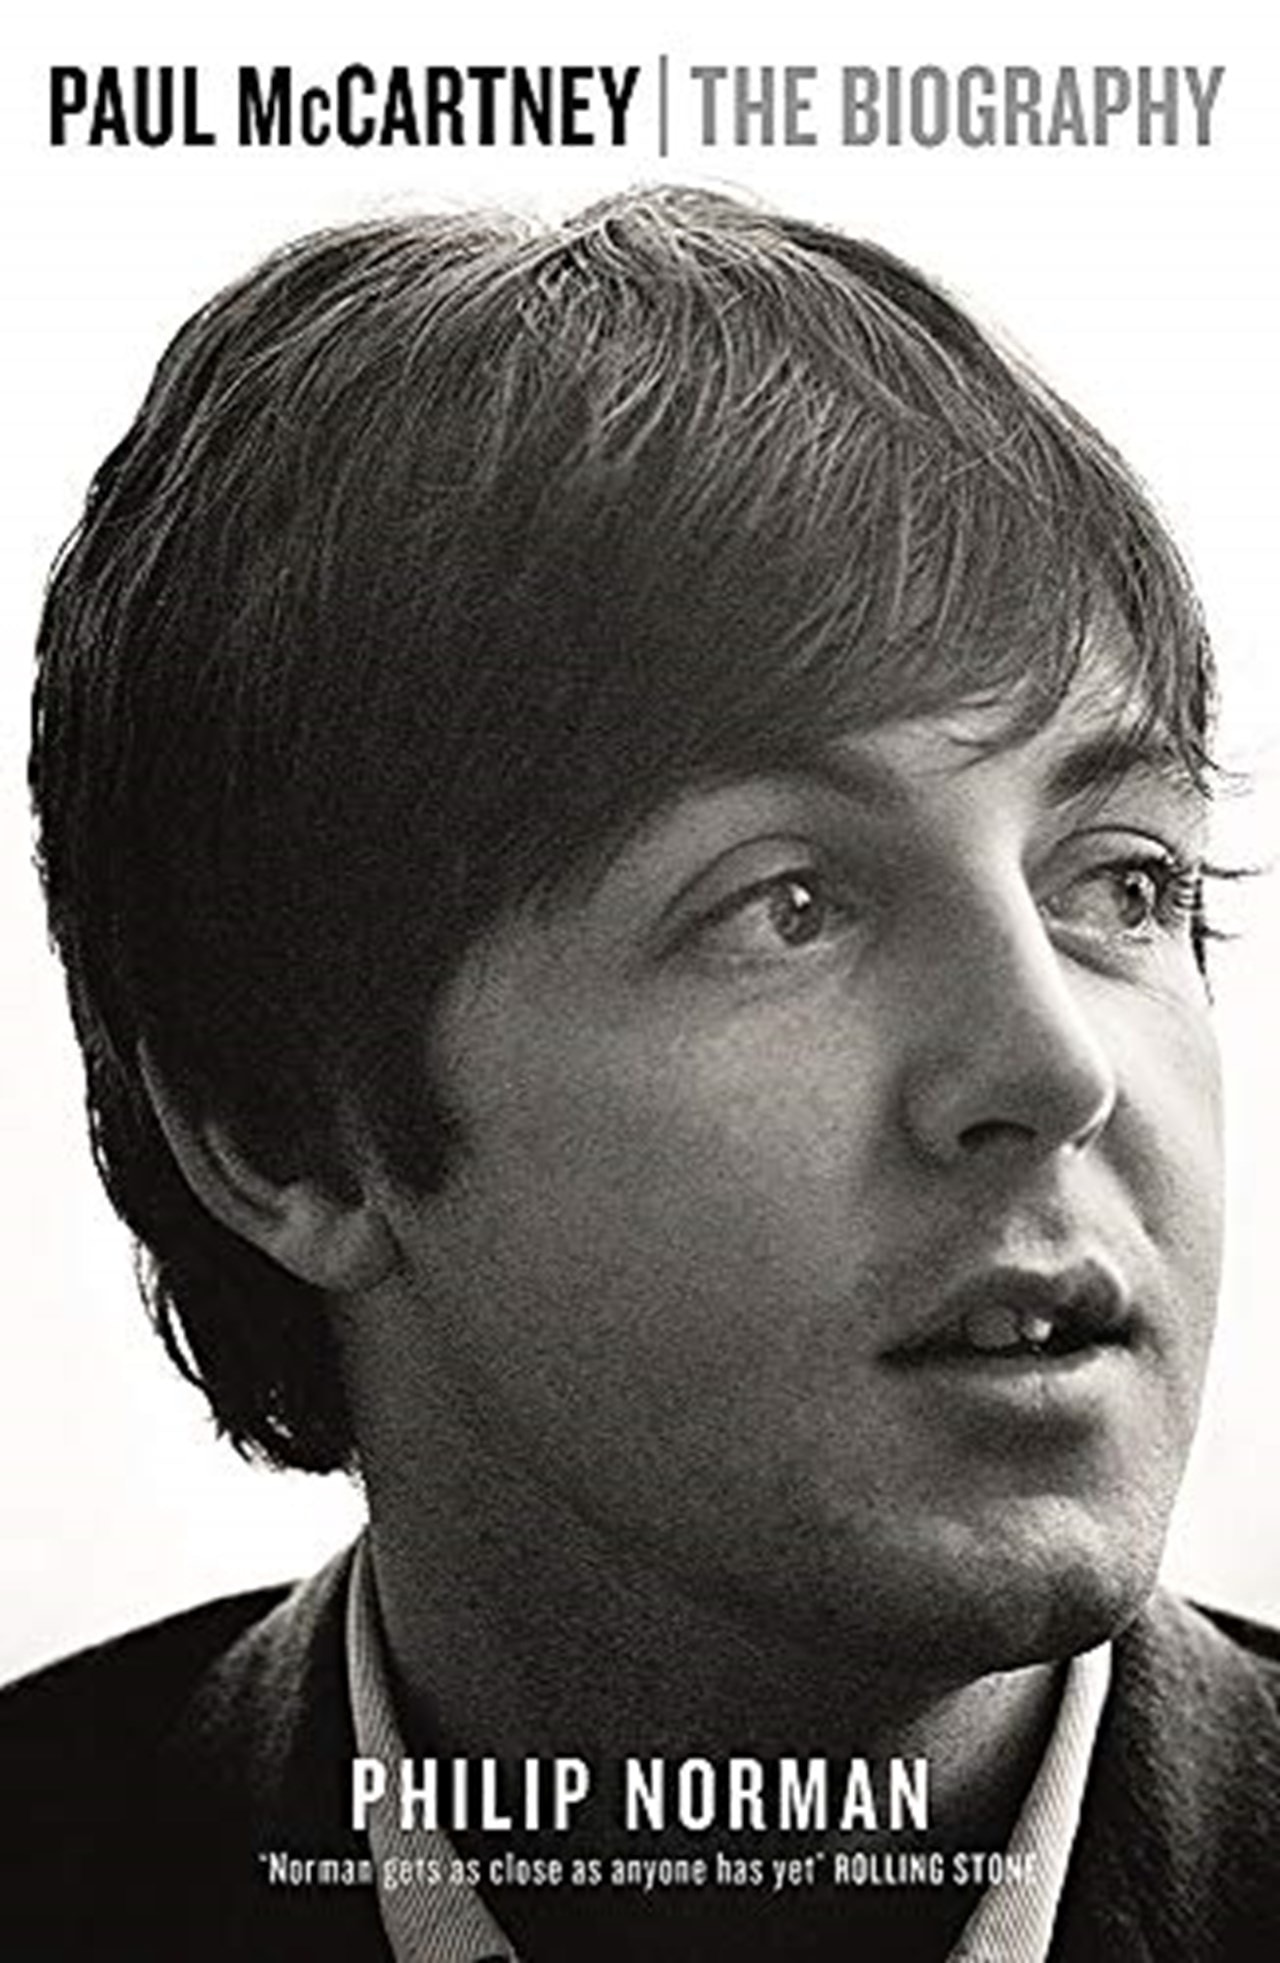 Paul McCartney: The Biography | Books | Free shipping over ...